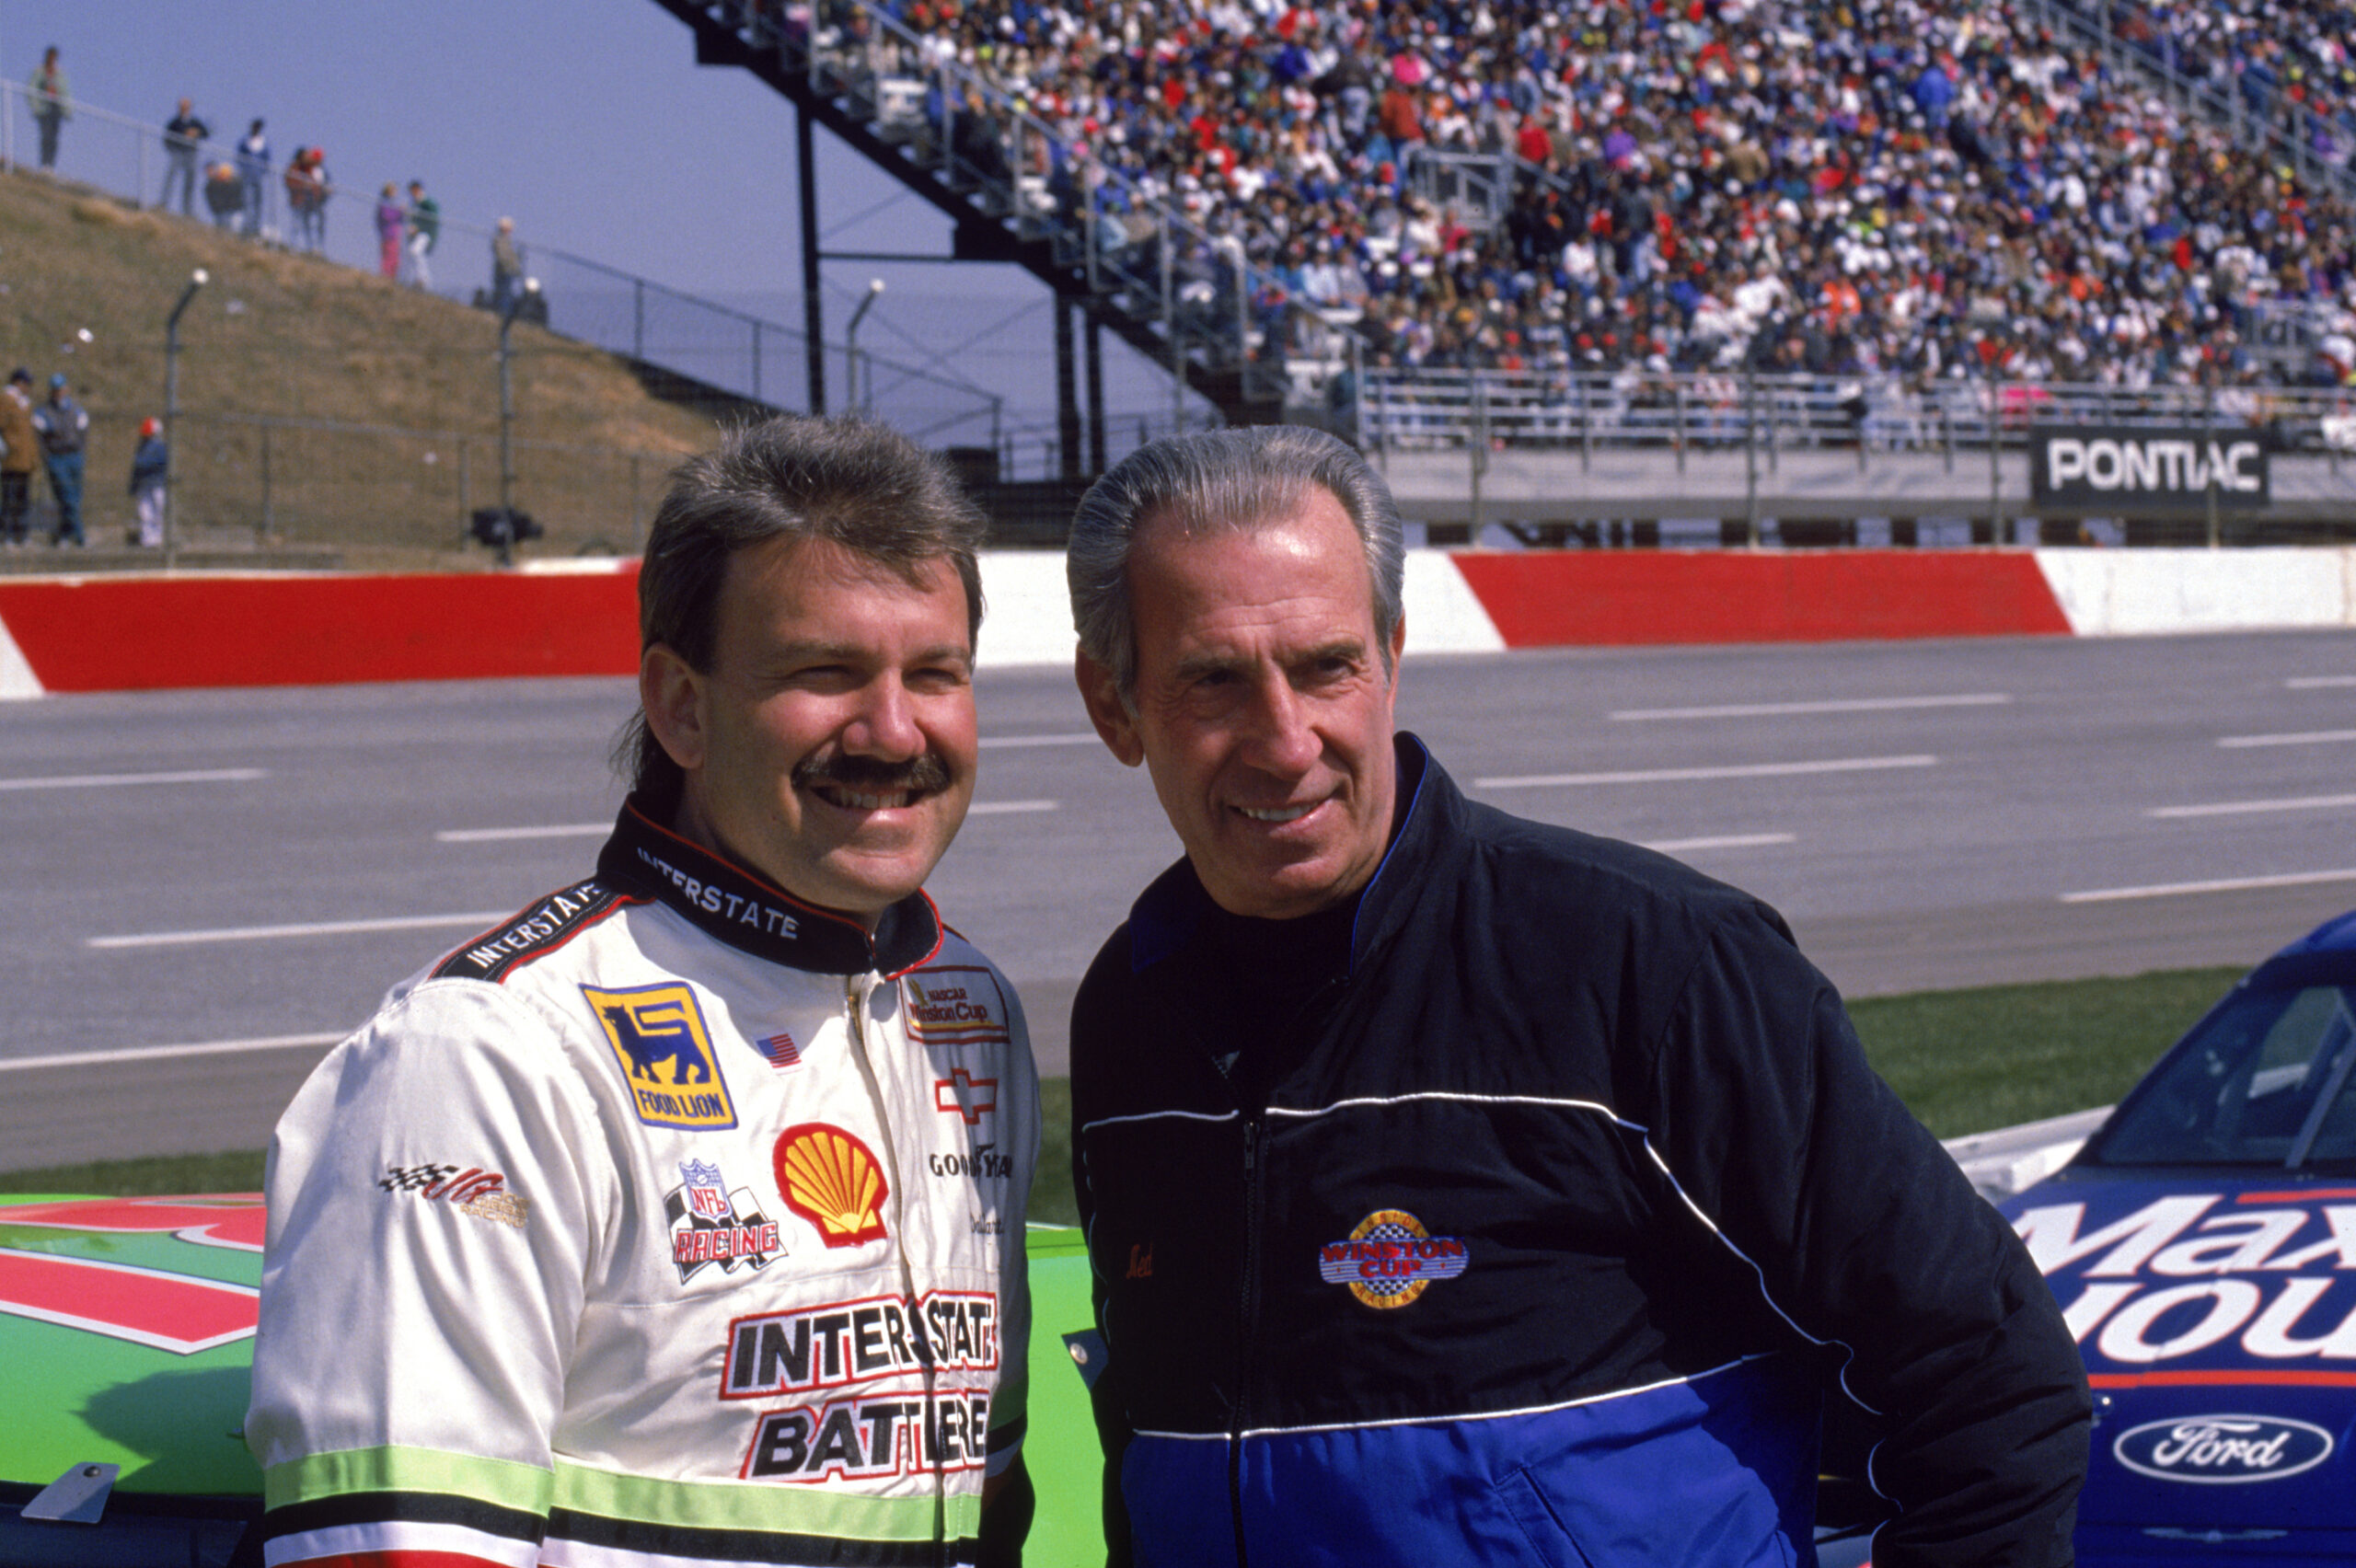 By and large, Dale Jarrett didn't look far for his lifelong hero. (Photo: Bill Hall | Getty Images)